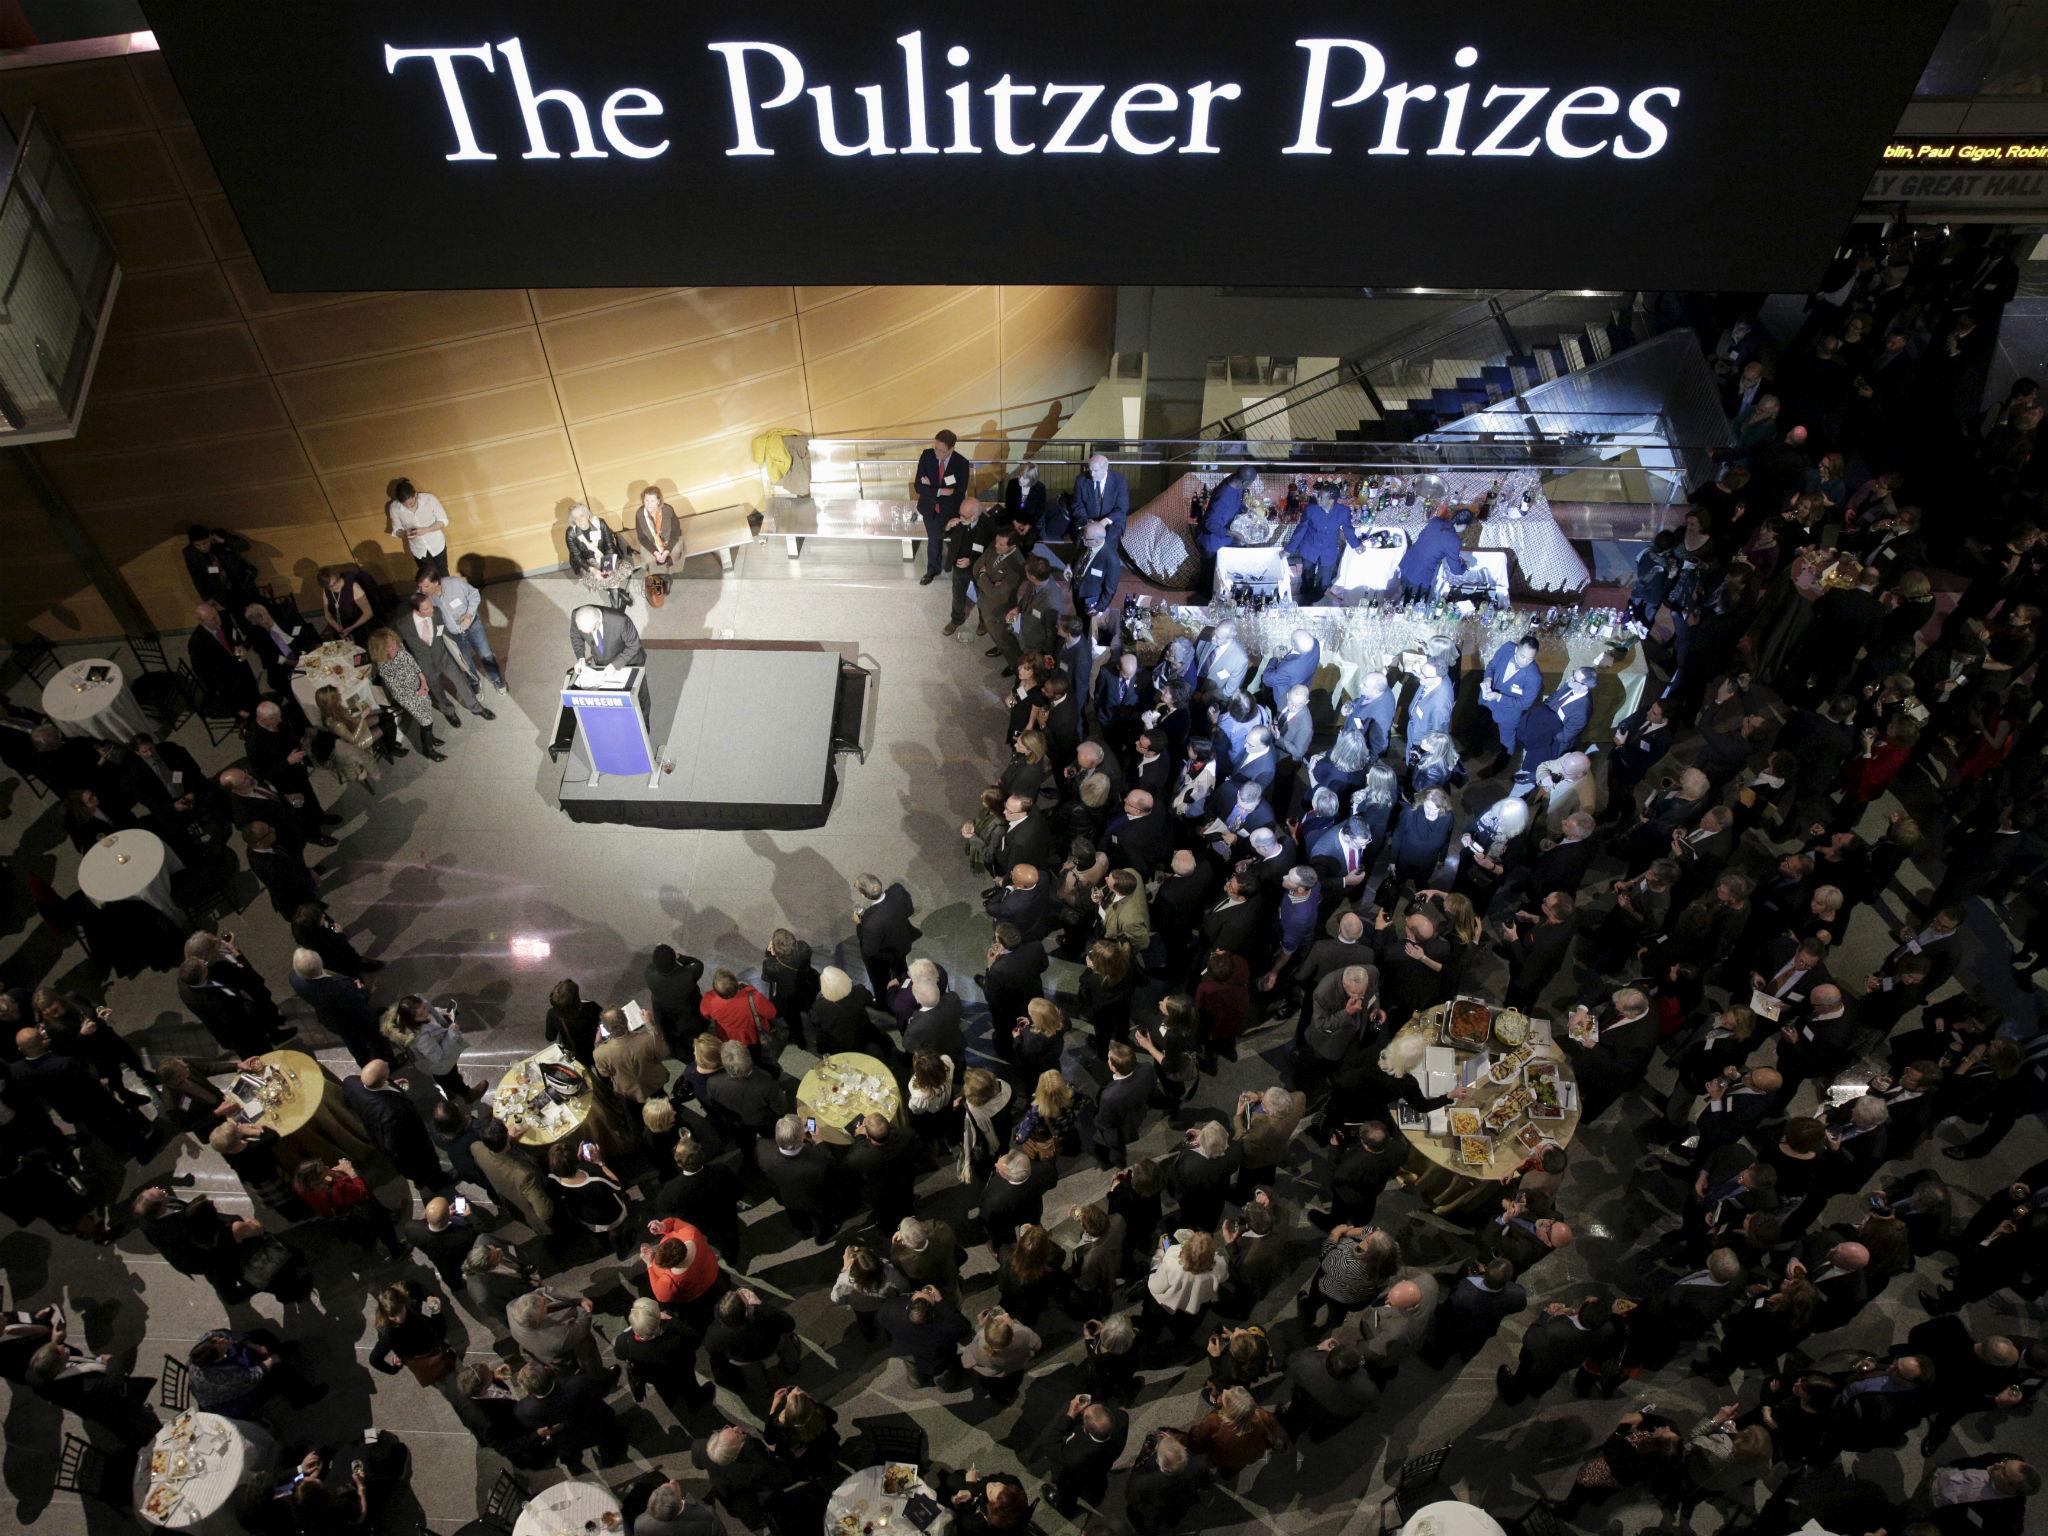 The New York Times and the Washington Post both took home multiple top awards